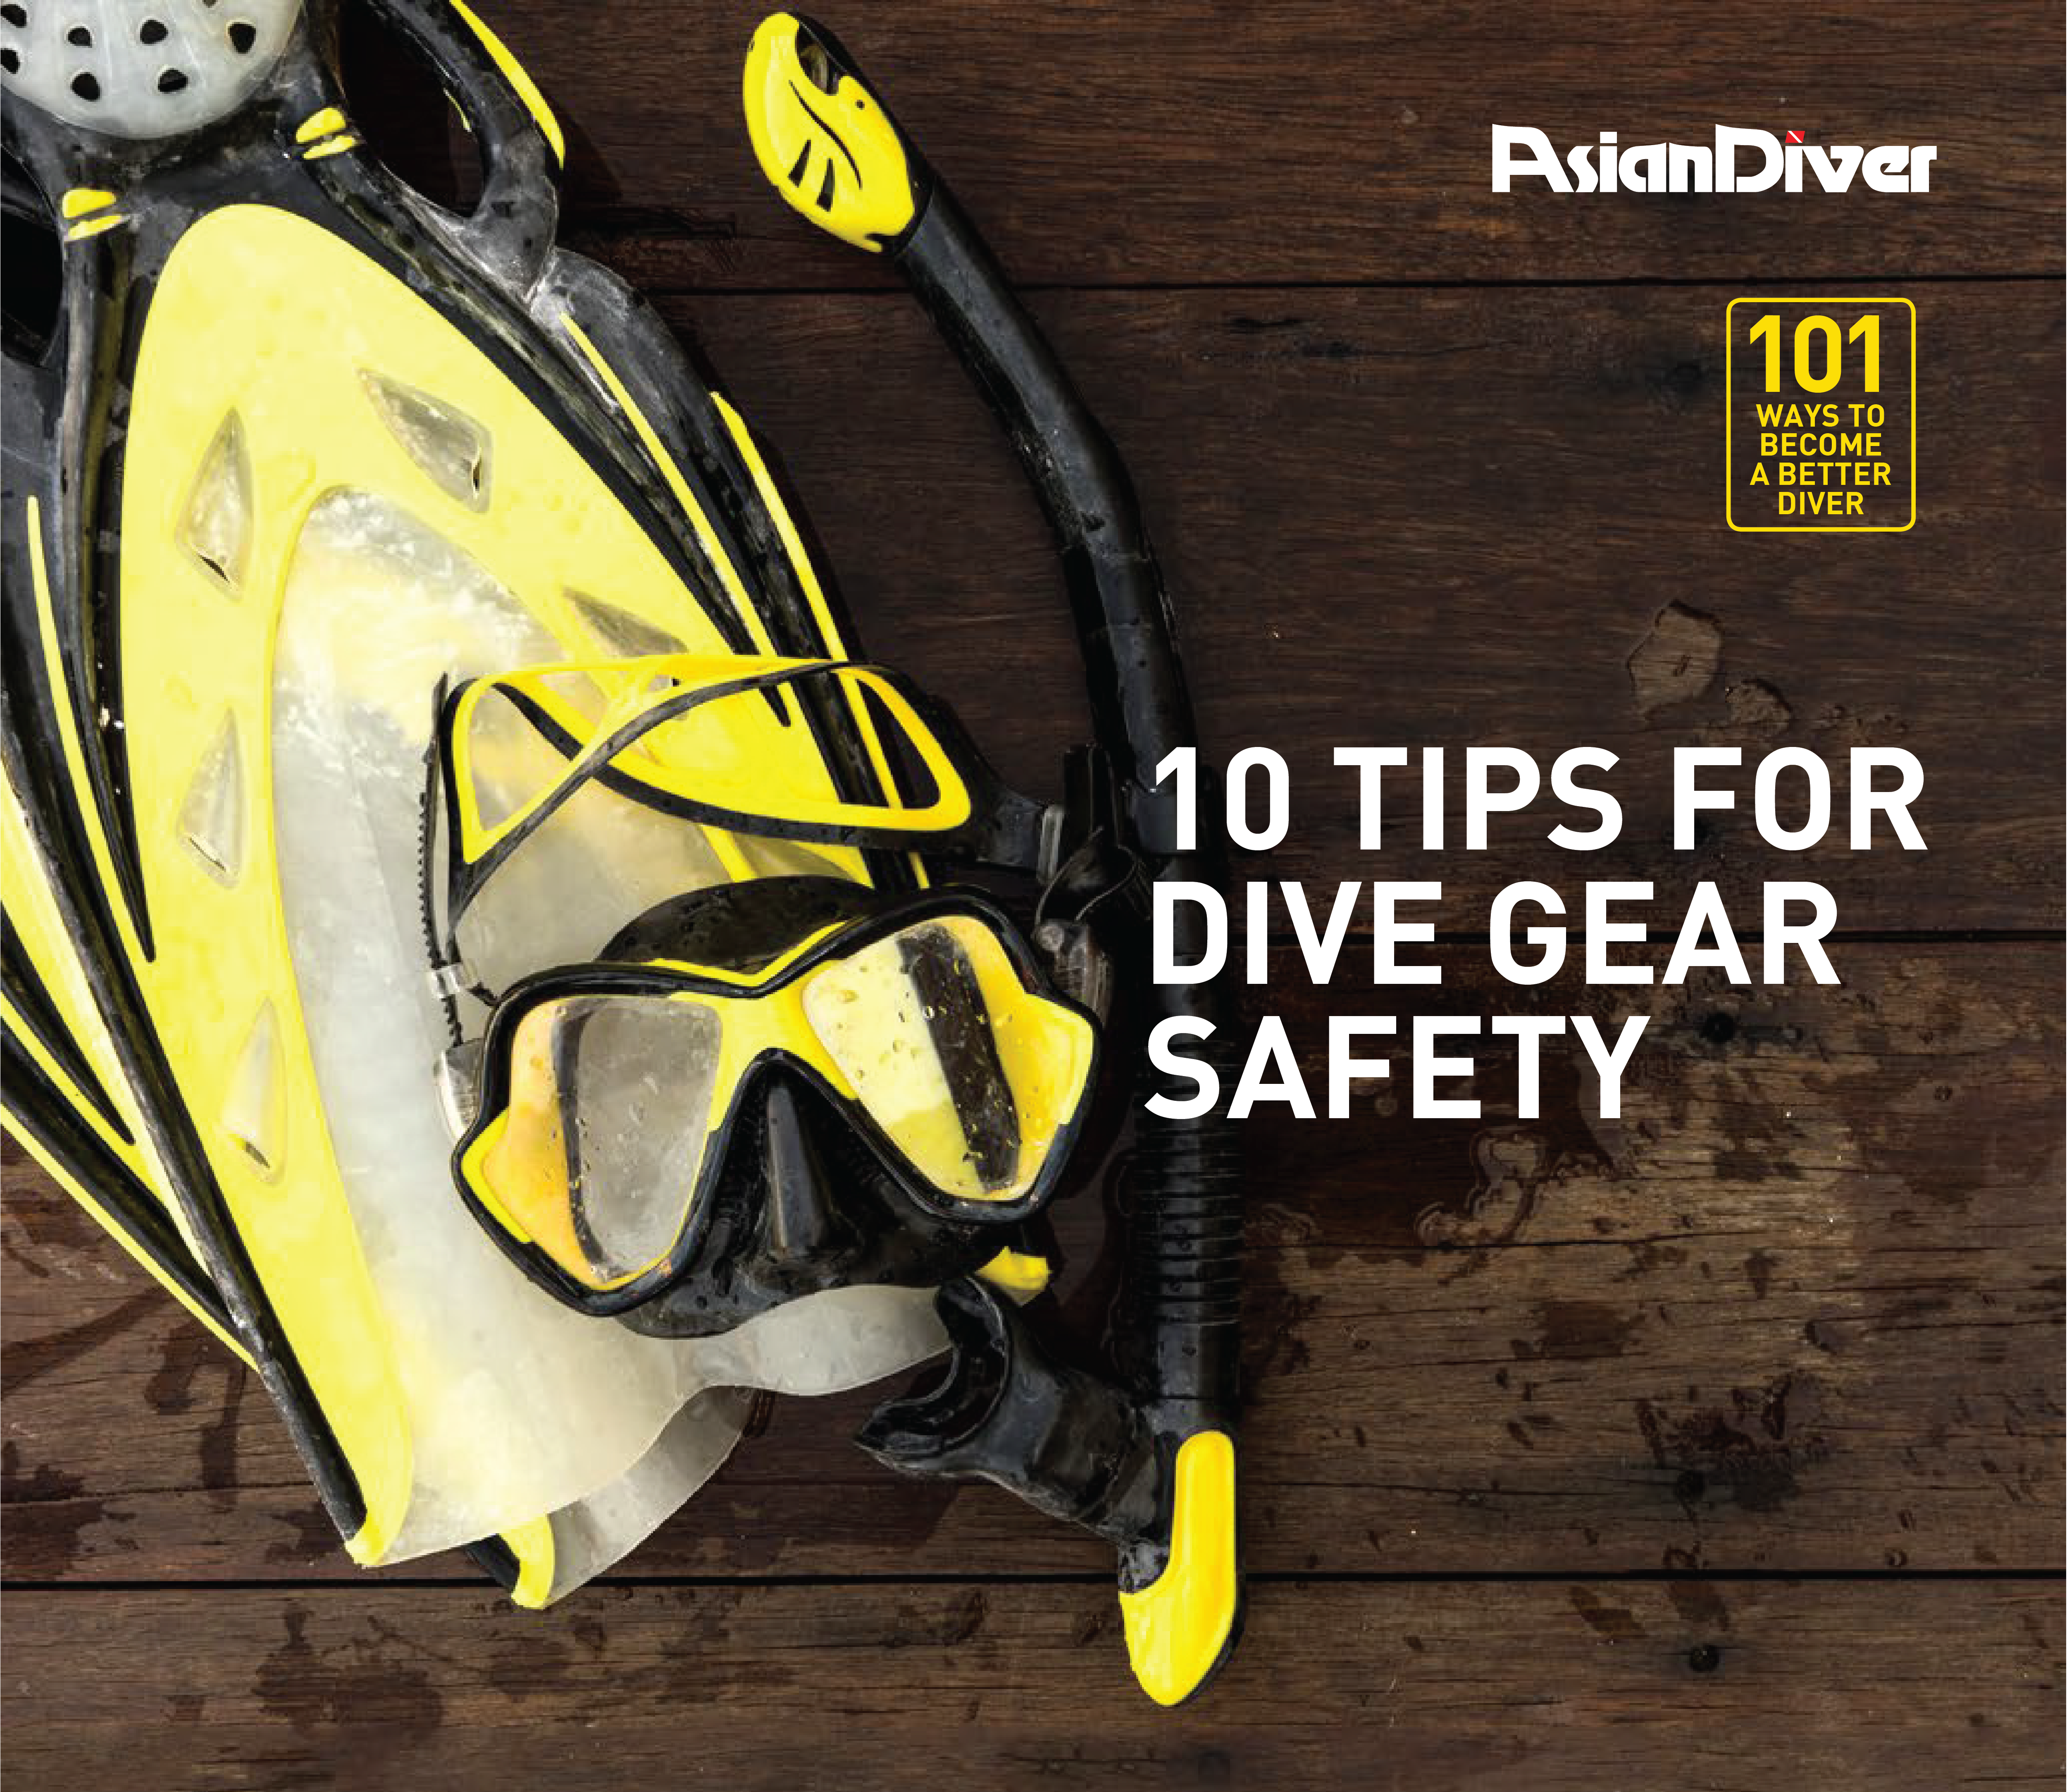 10 Tips for Dive Gear Safety - Underwater360